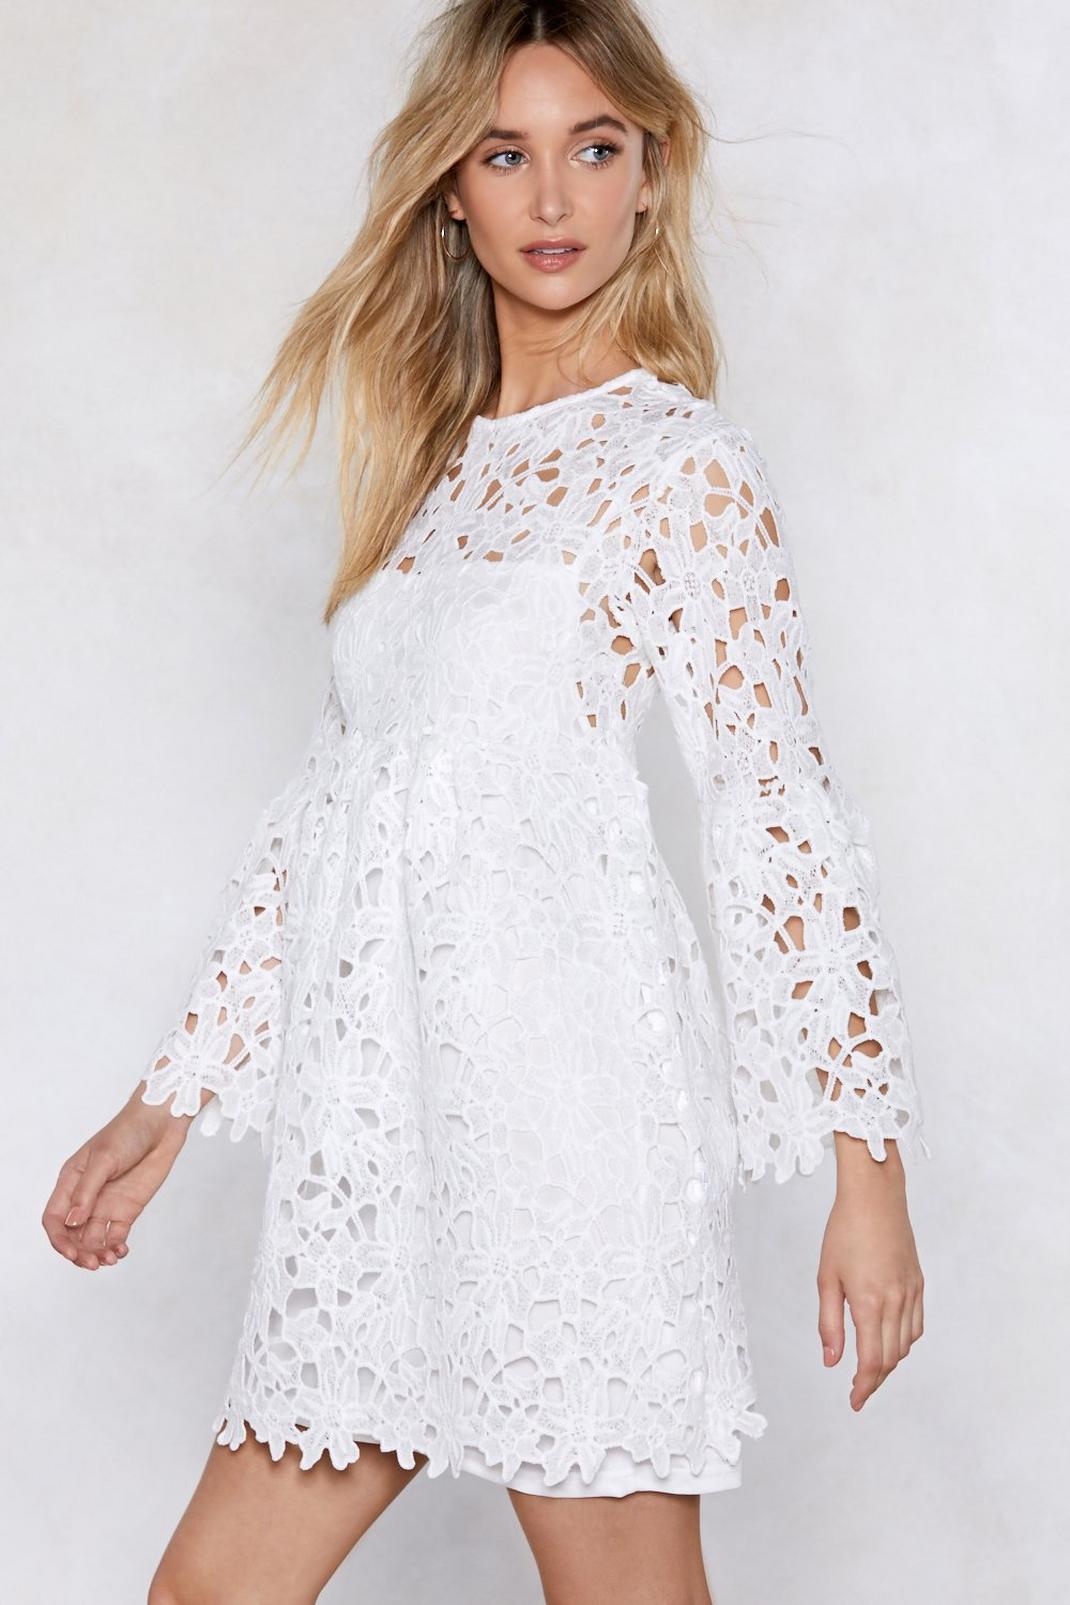 Turn and Lace Me Crochet Dress | Nasty Gal